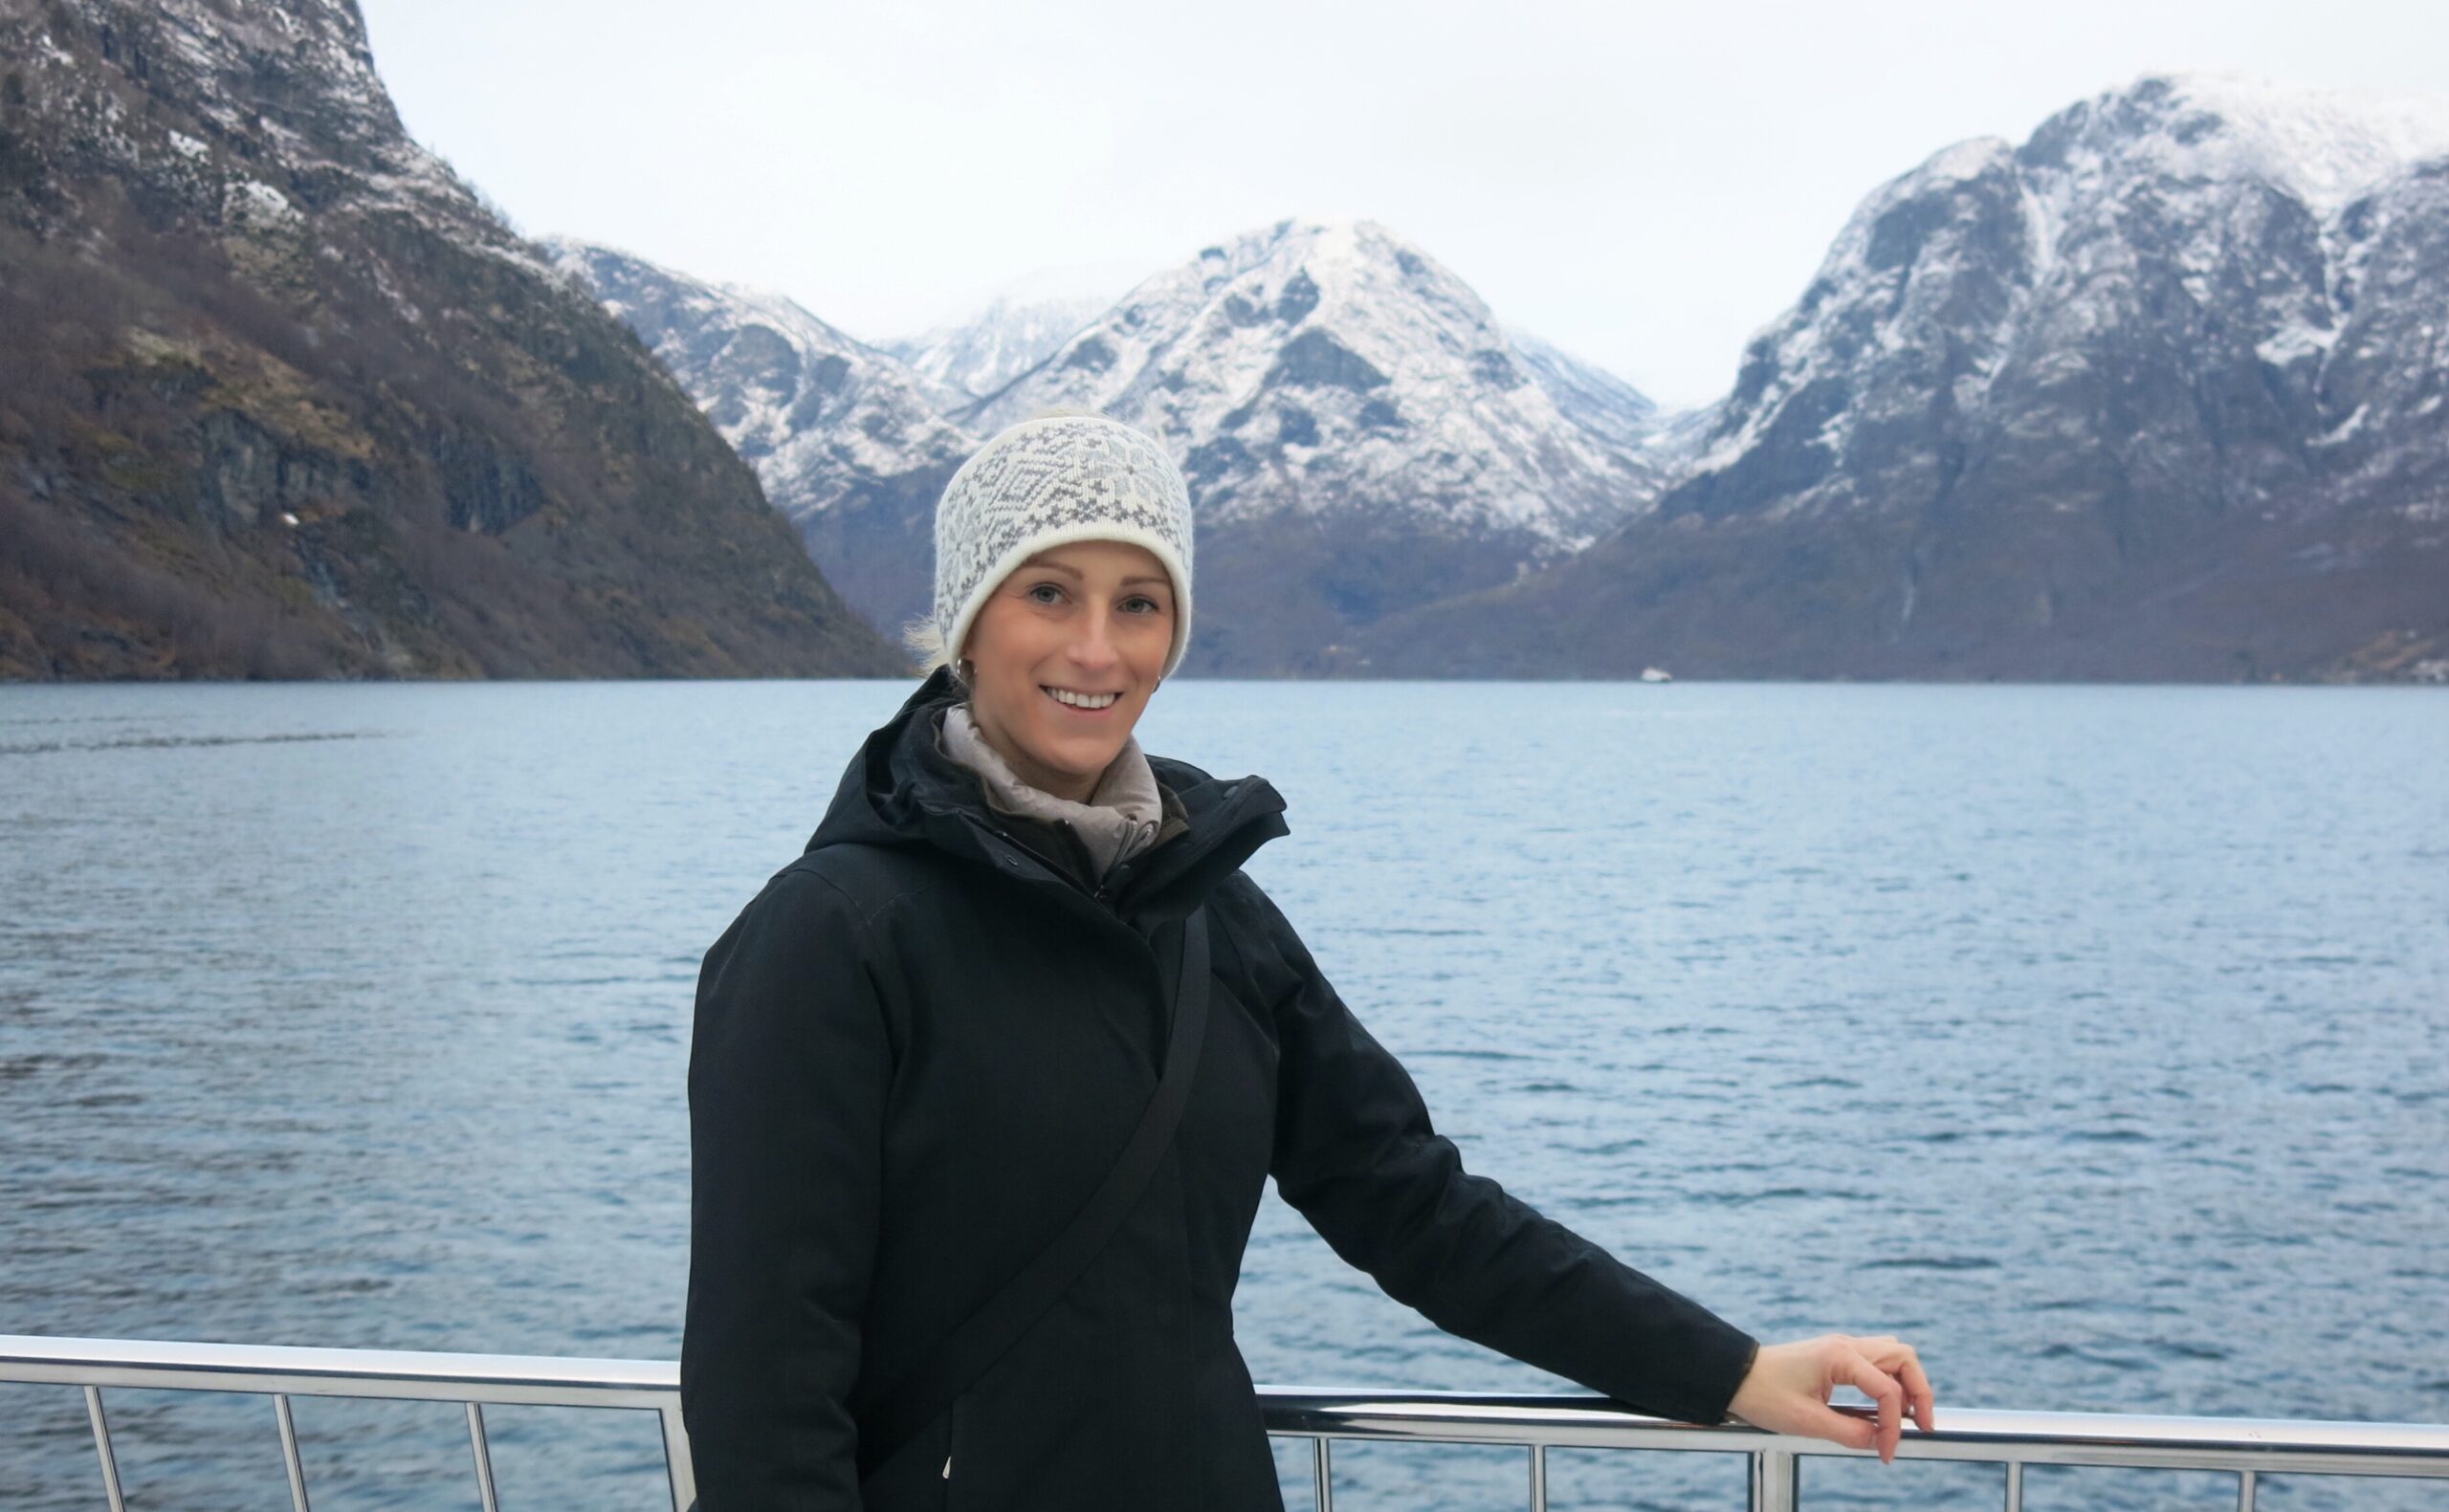 Georgie is standing at the bow of a boat, rugged up in a warm black jacket. She is on a cruise in Norway. The beautiful Aurlandsfjord and snow-covered mountains are in the background..